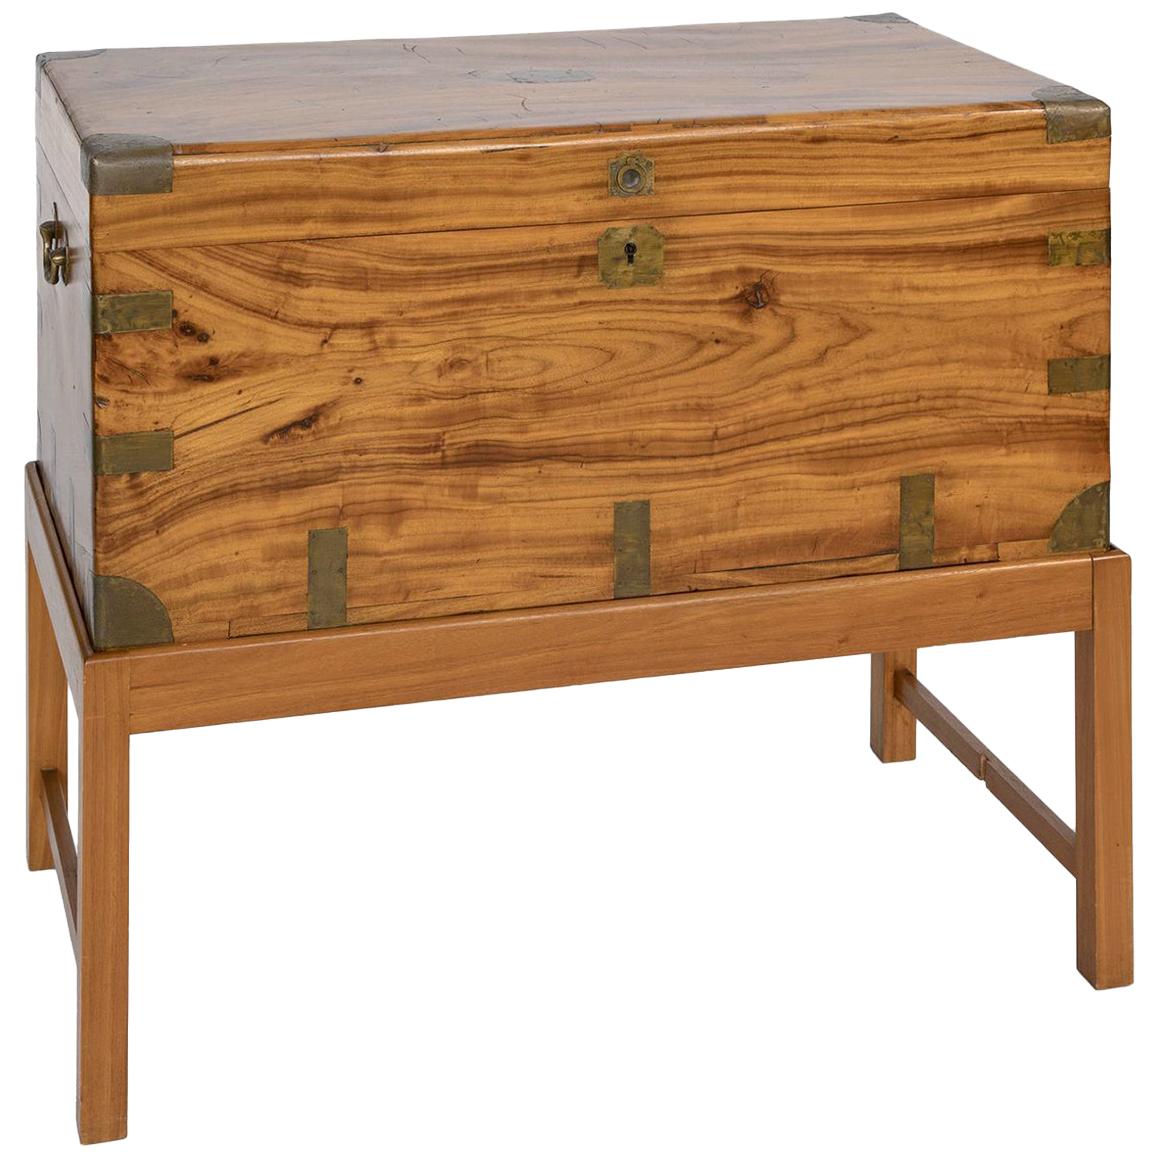 Mid-19th Century Chinese Camphor Chest